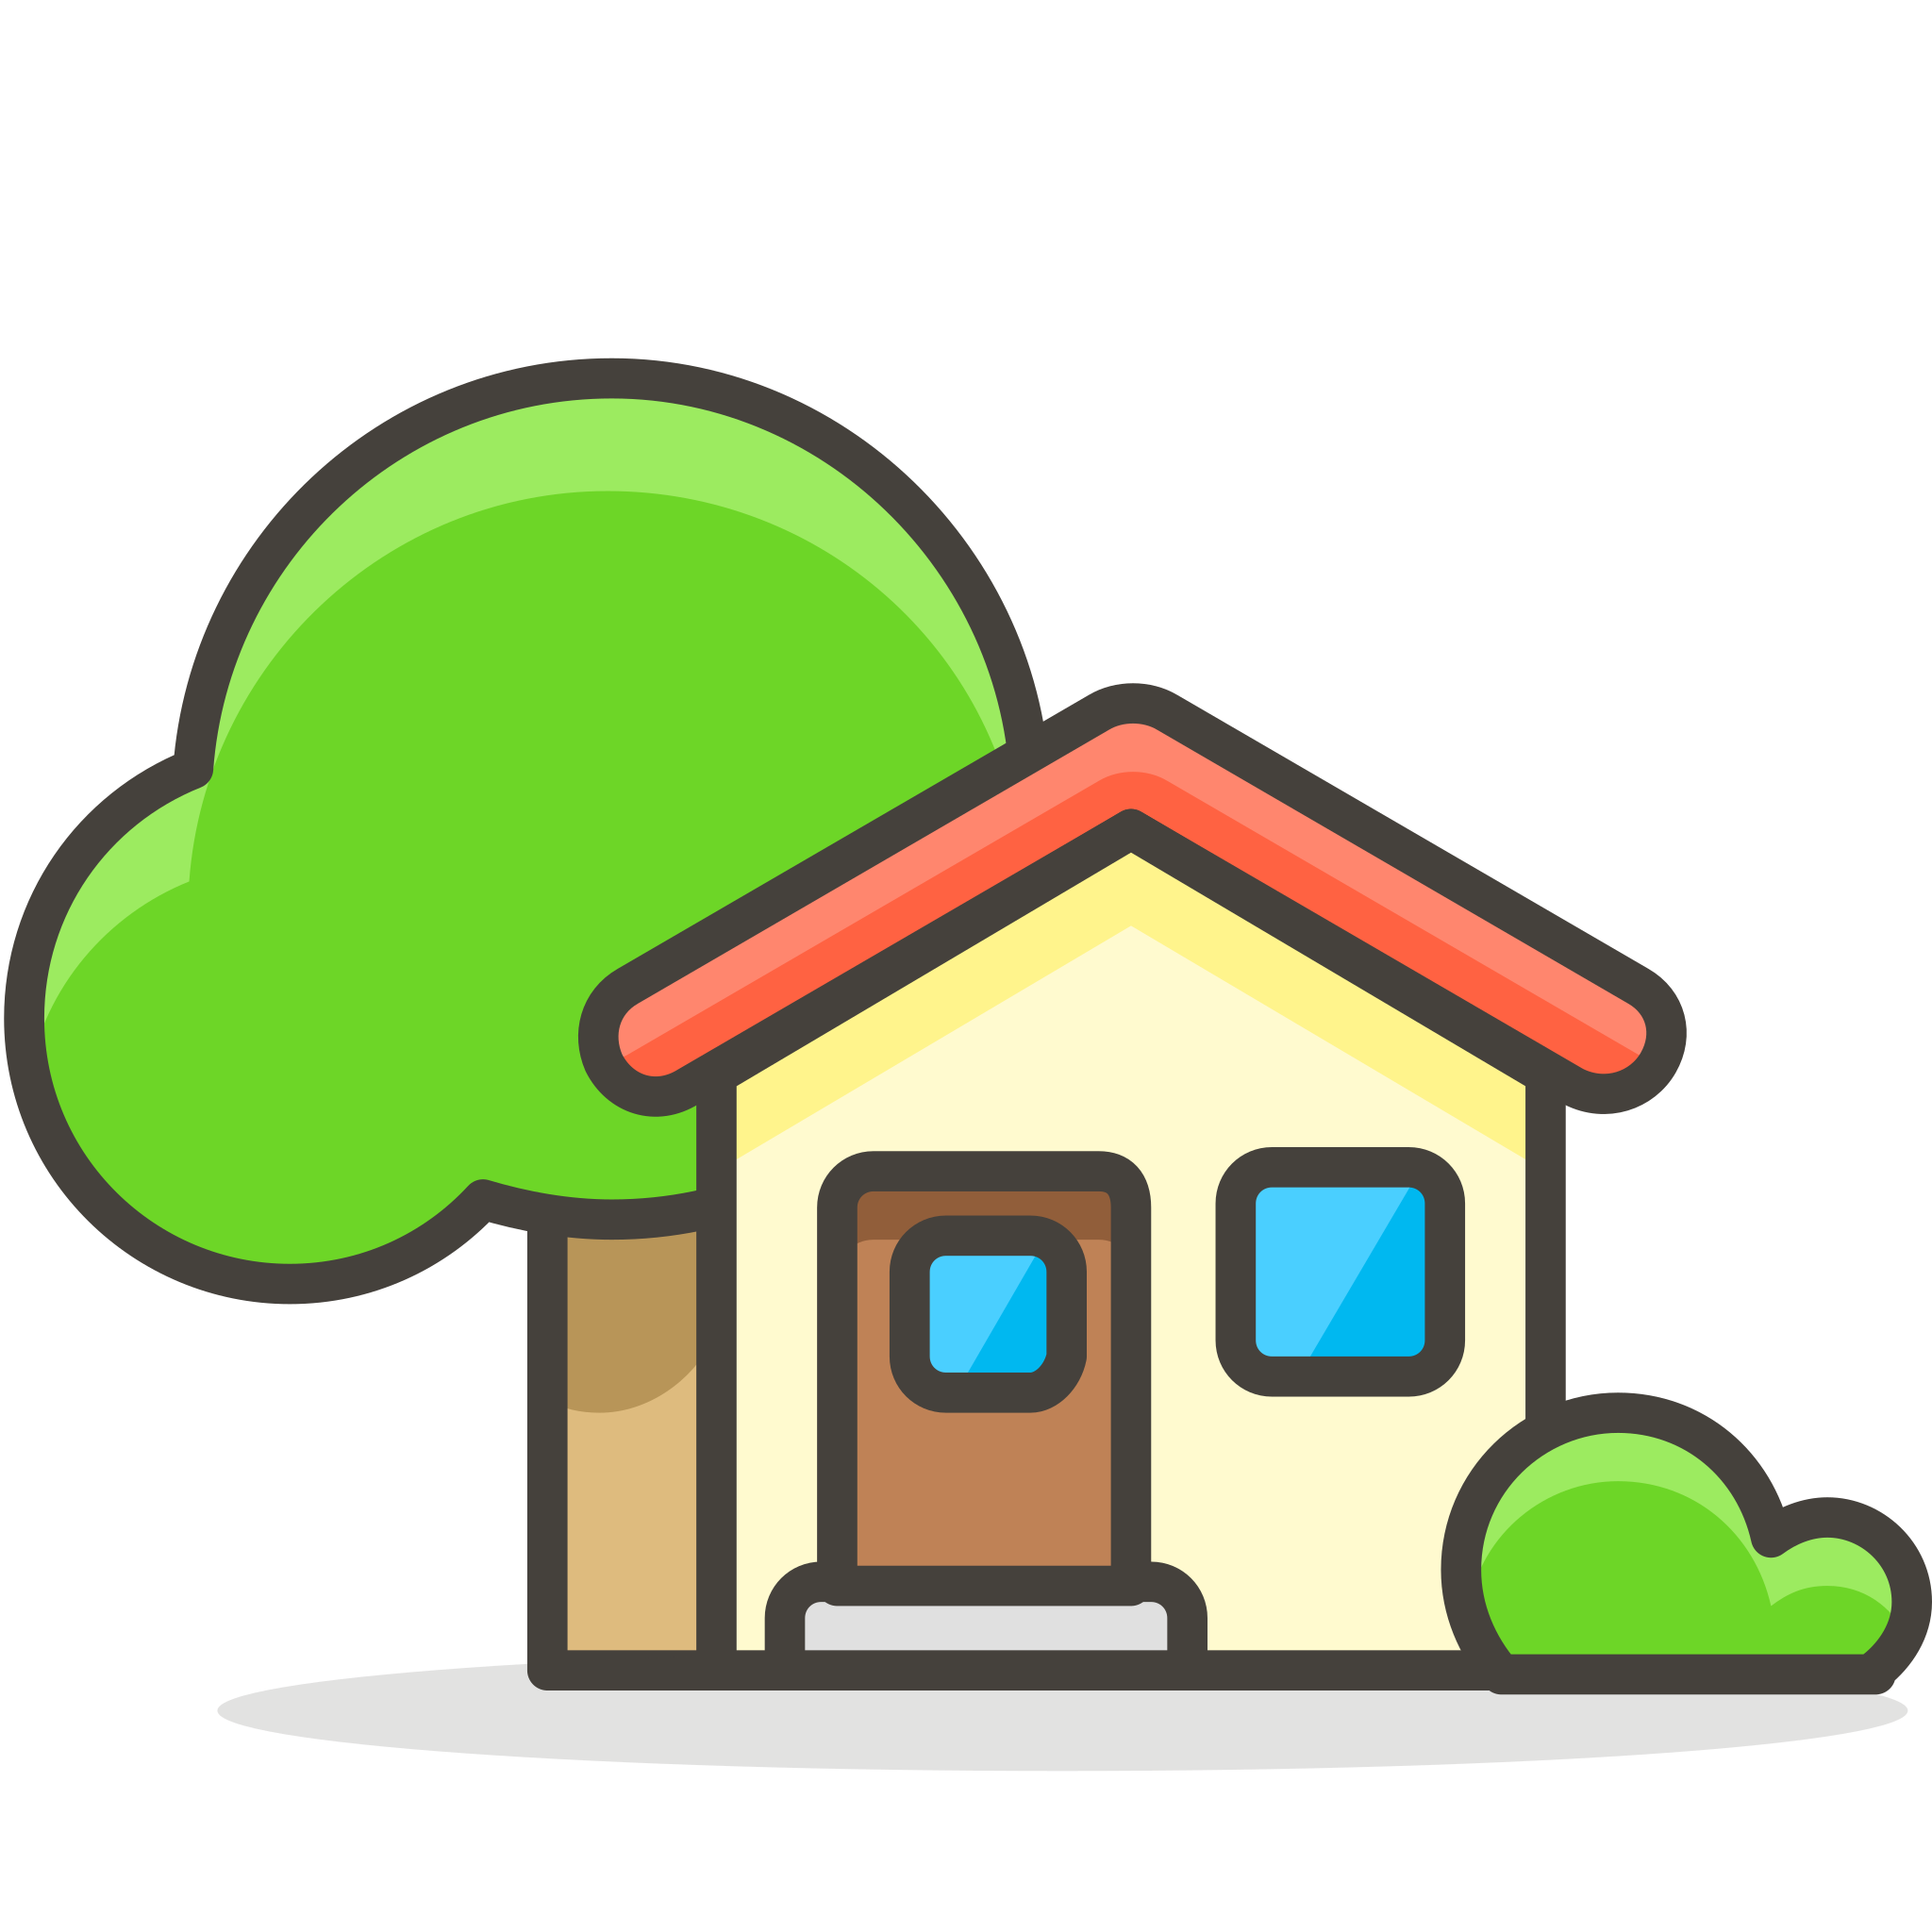 File:586-house-with-garden.svg - Wikipedia